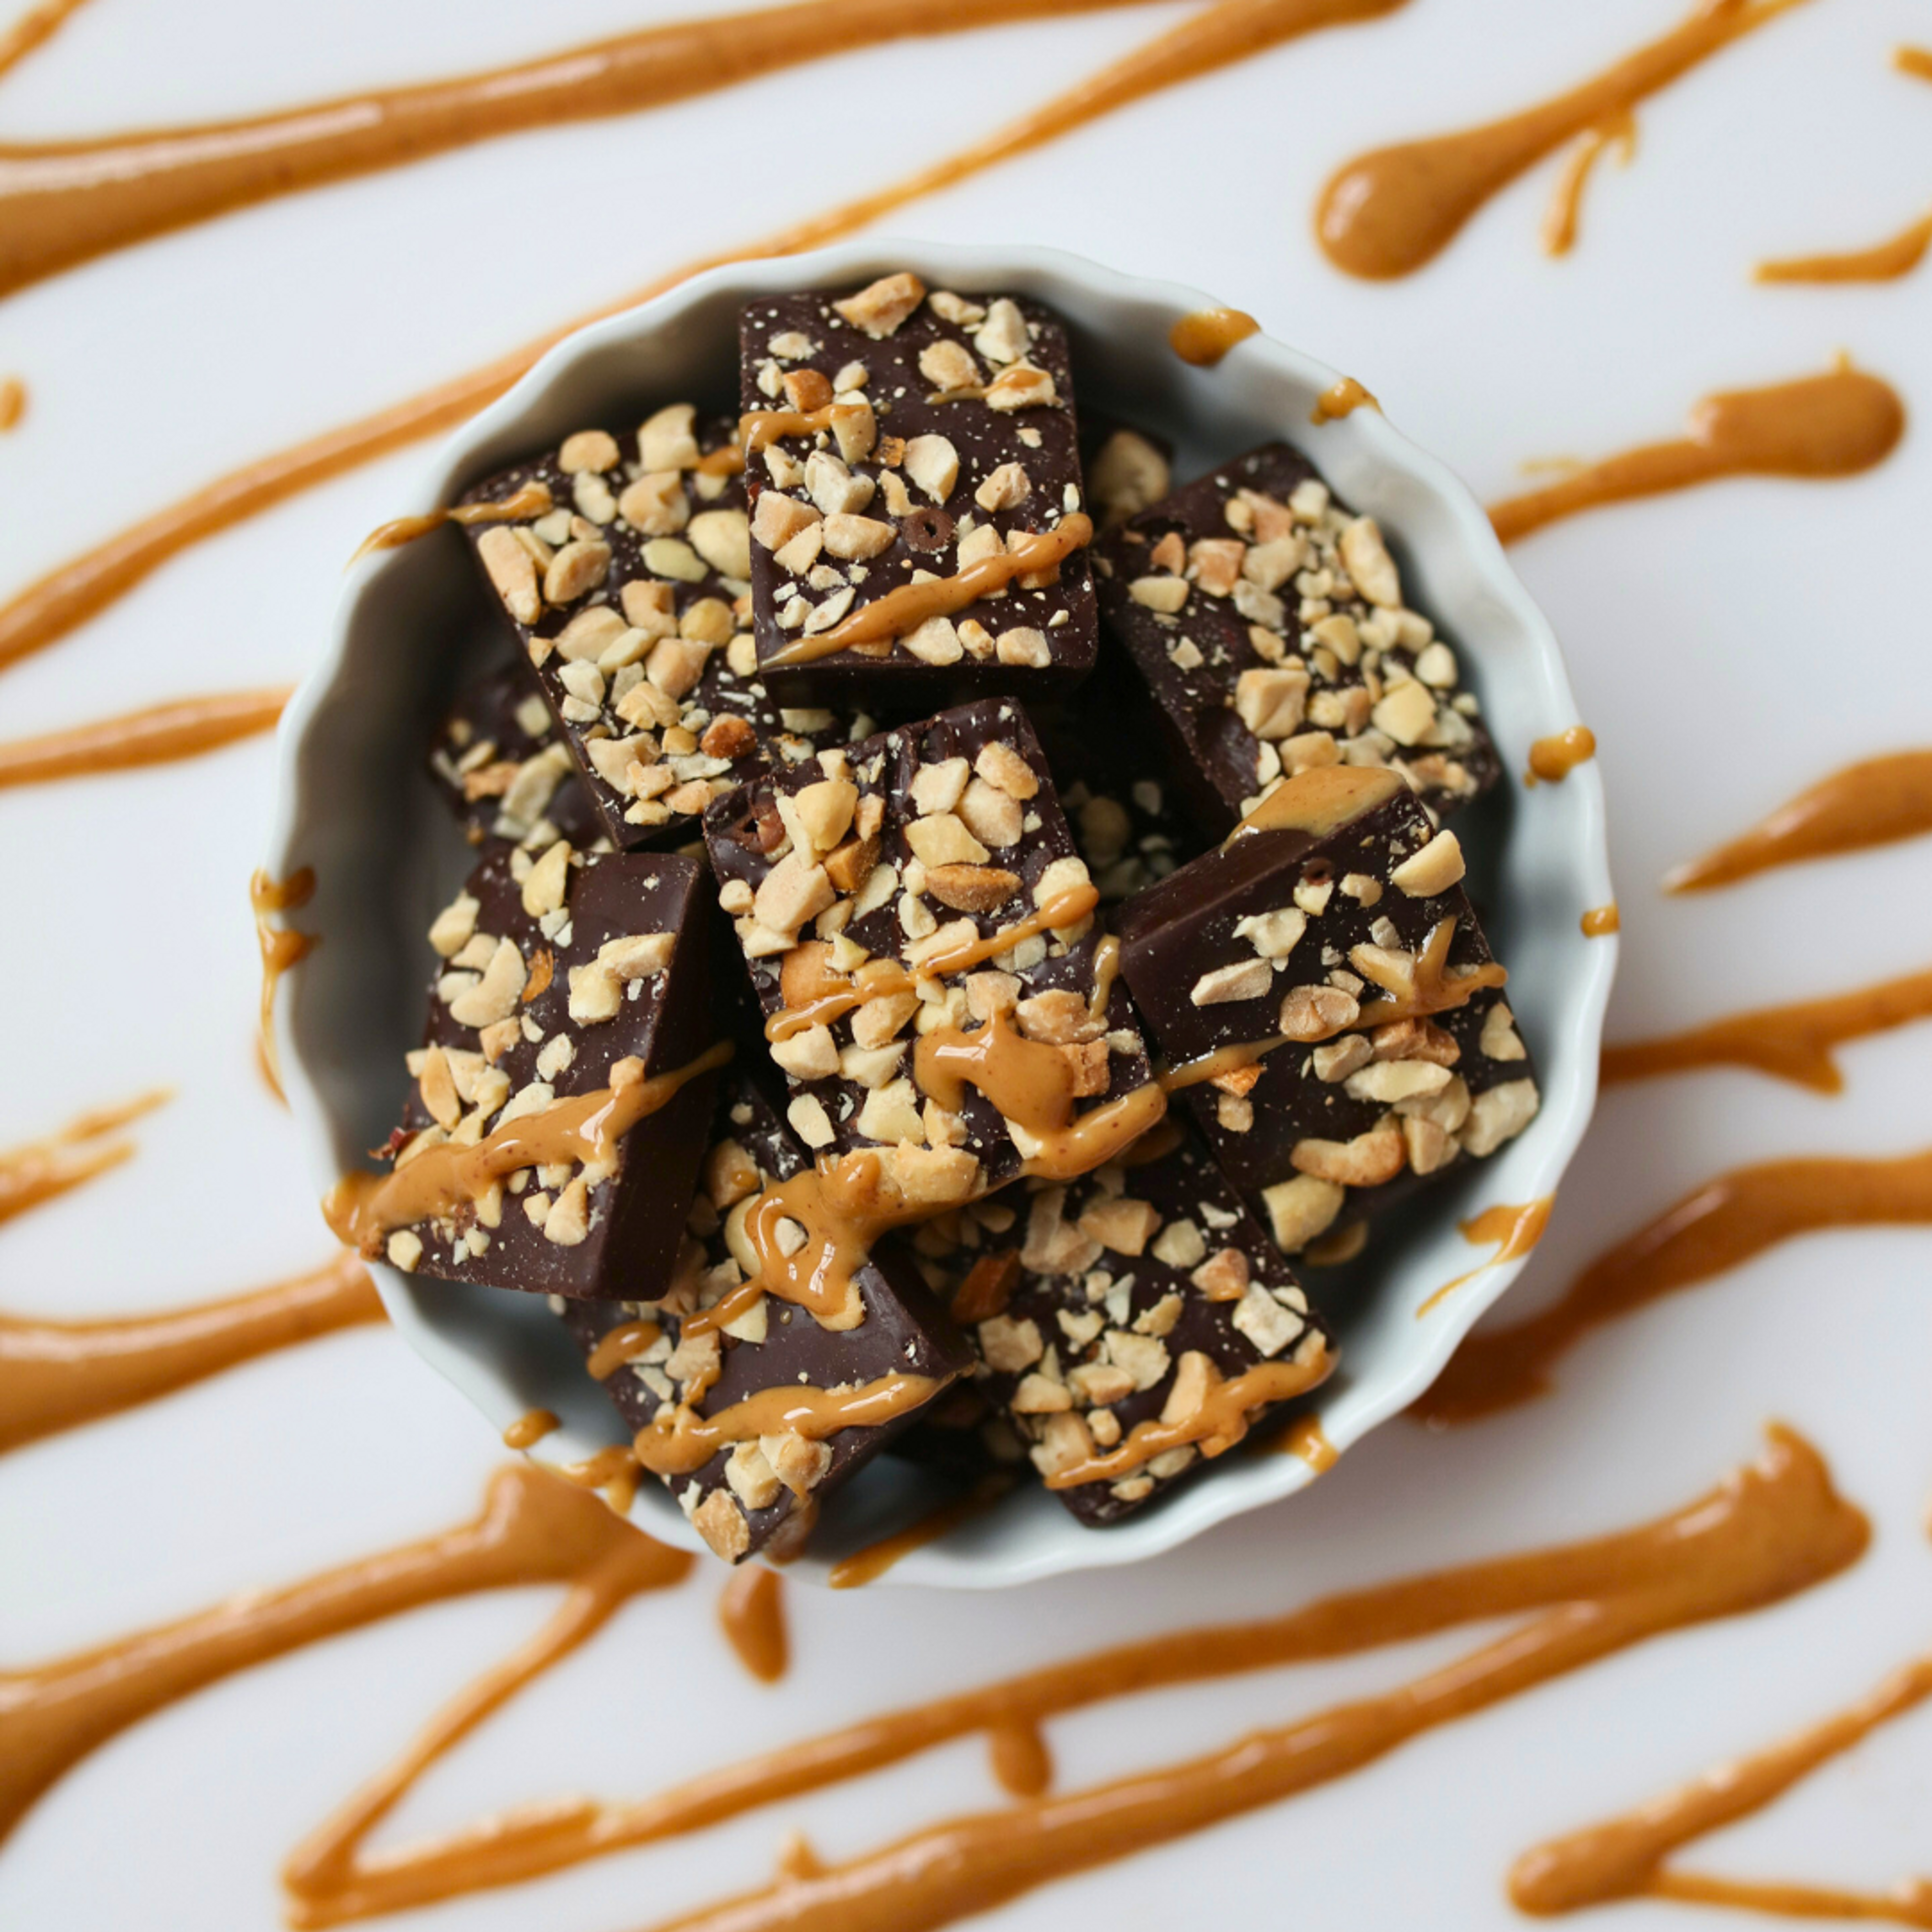 Dark Chocolate PEANUT BUTTER FILLED BITES + Plant-Based Protein